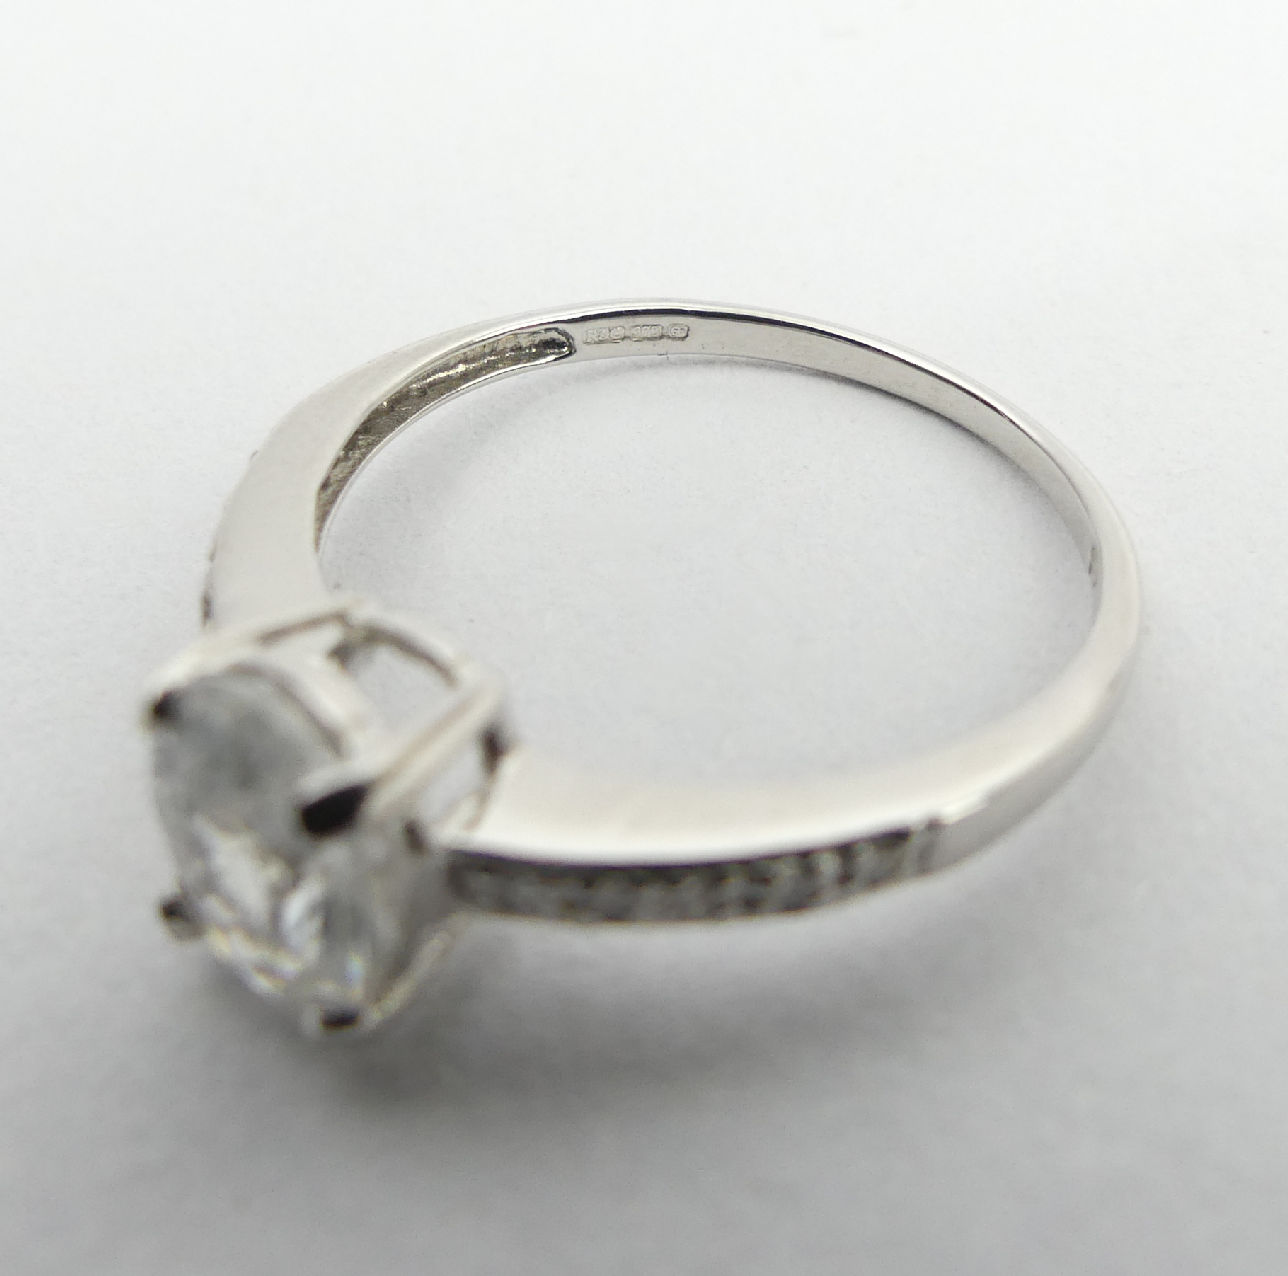 9ct white gold topaz and diamond ring, 1.9 grams, 8mm, size N1/2. UK Postage £12. - Image 6 of 6